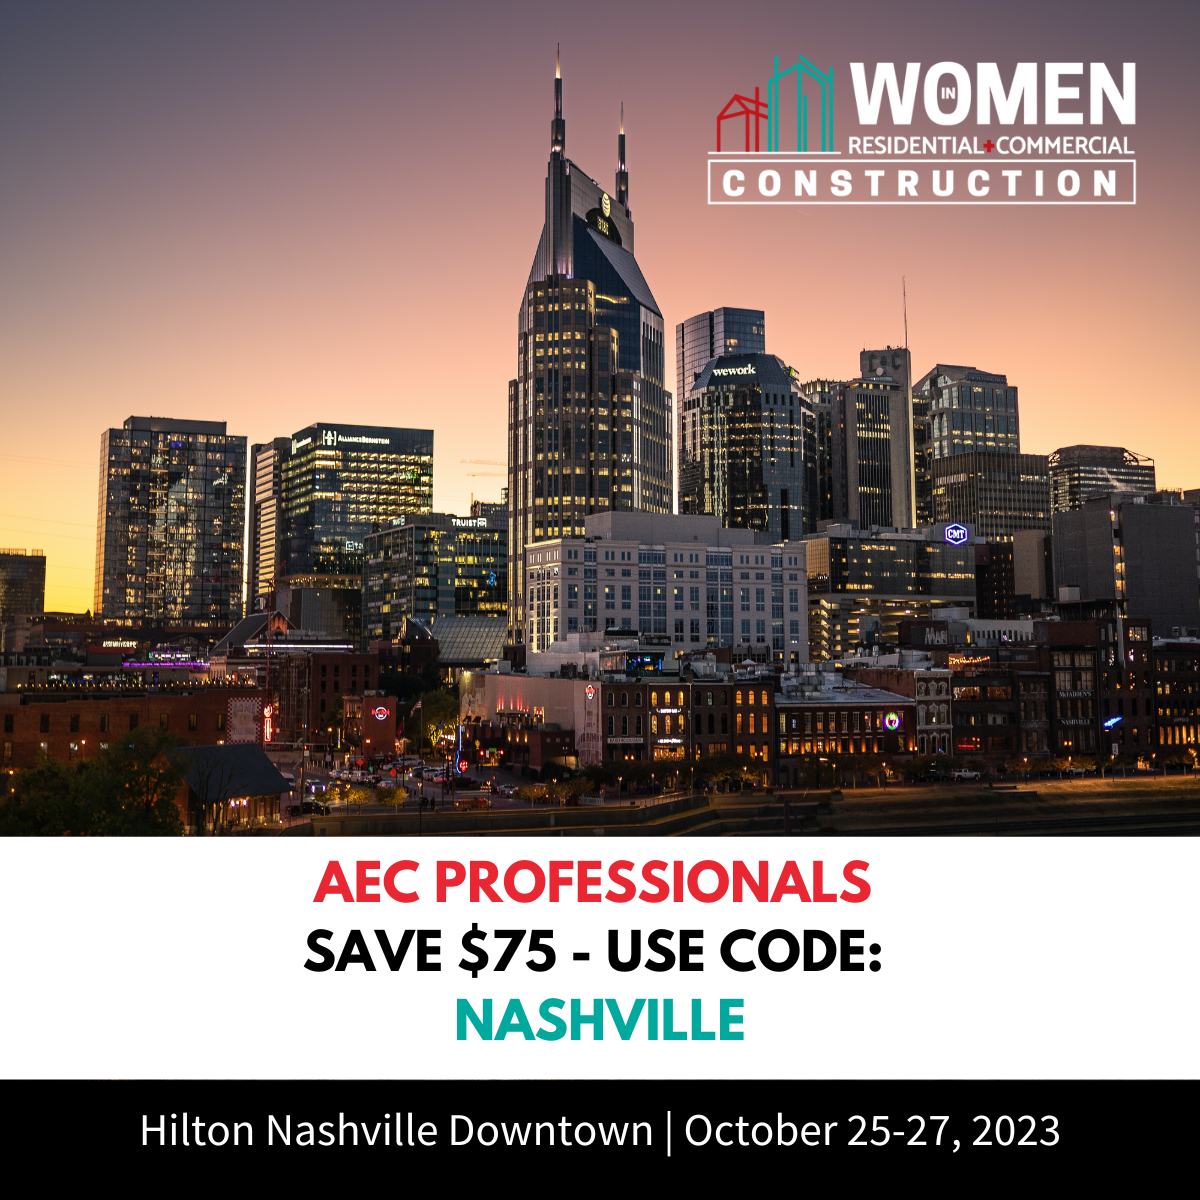 Reserve your spot today for Women in Residential+Commercial Construction, Oct. 25-27, Nashville 